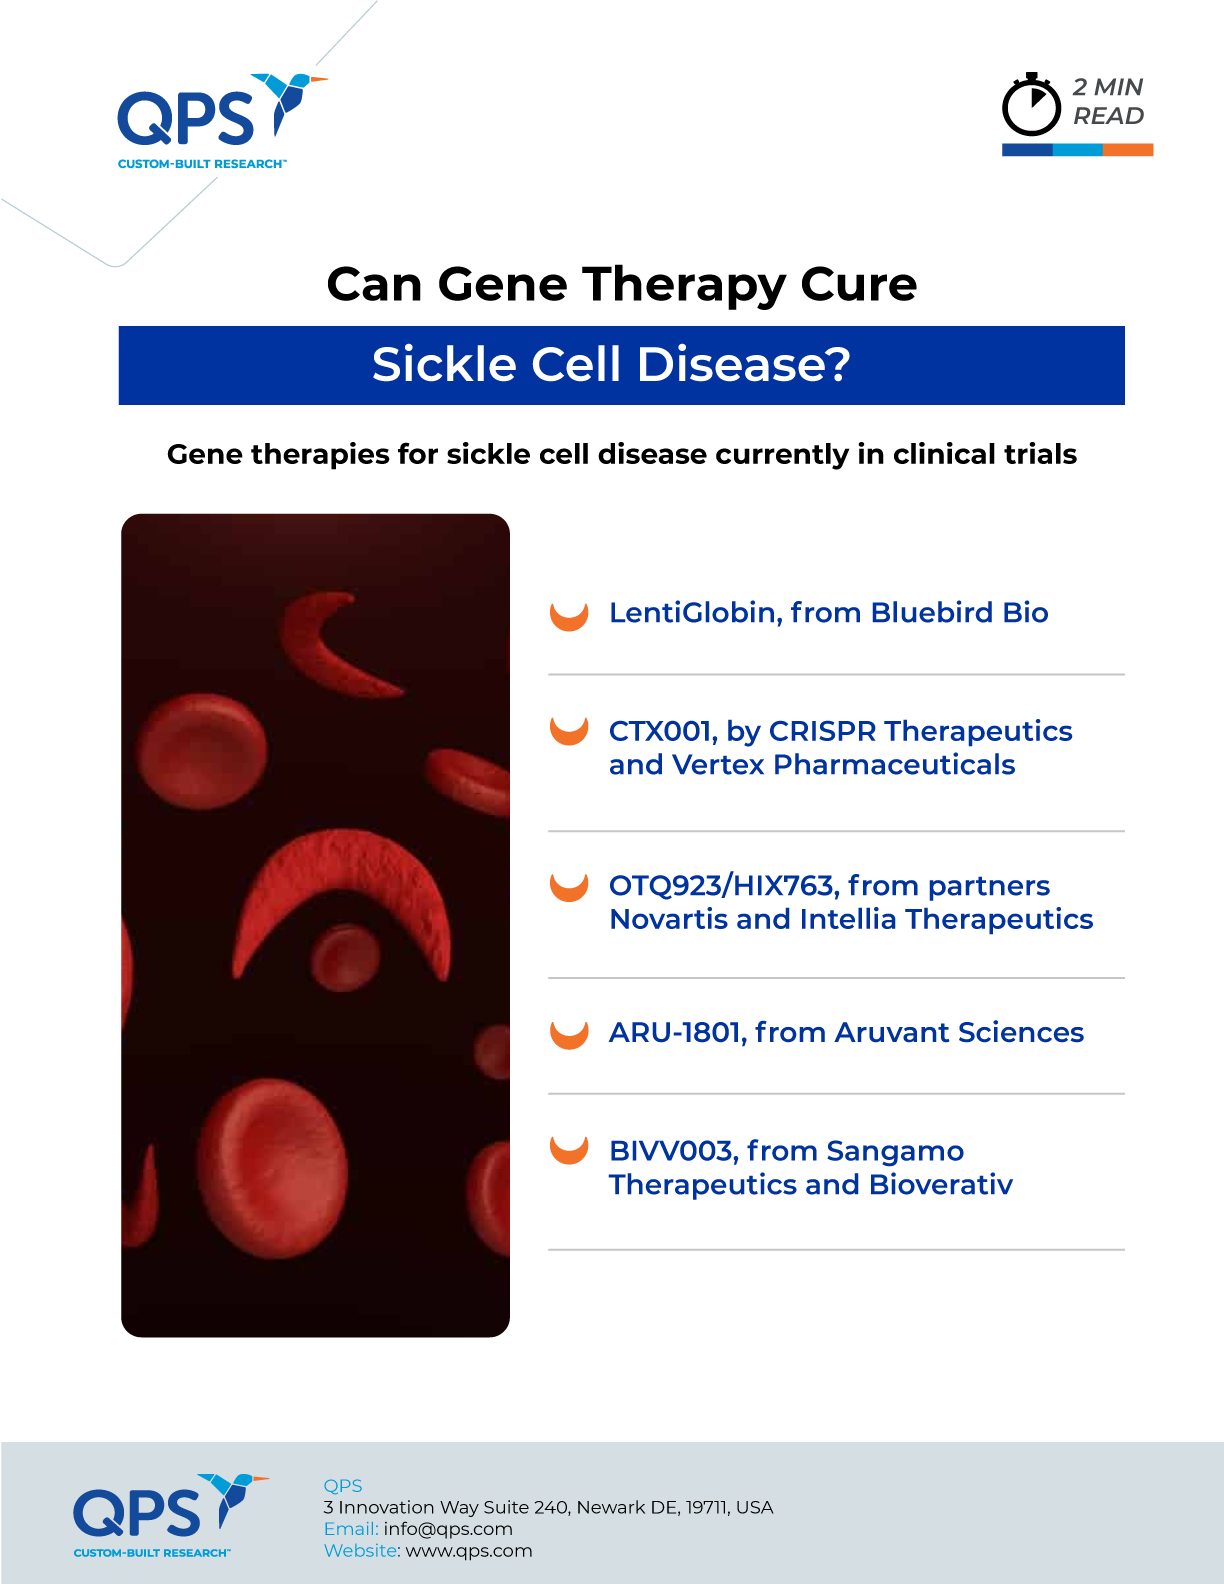 Can Gene Therapy Cure Sickle Cell Disease